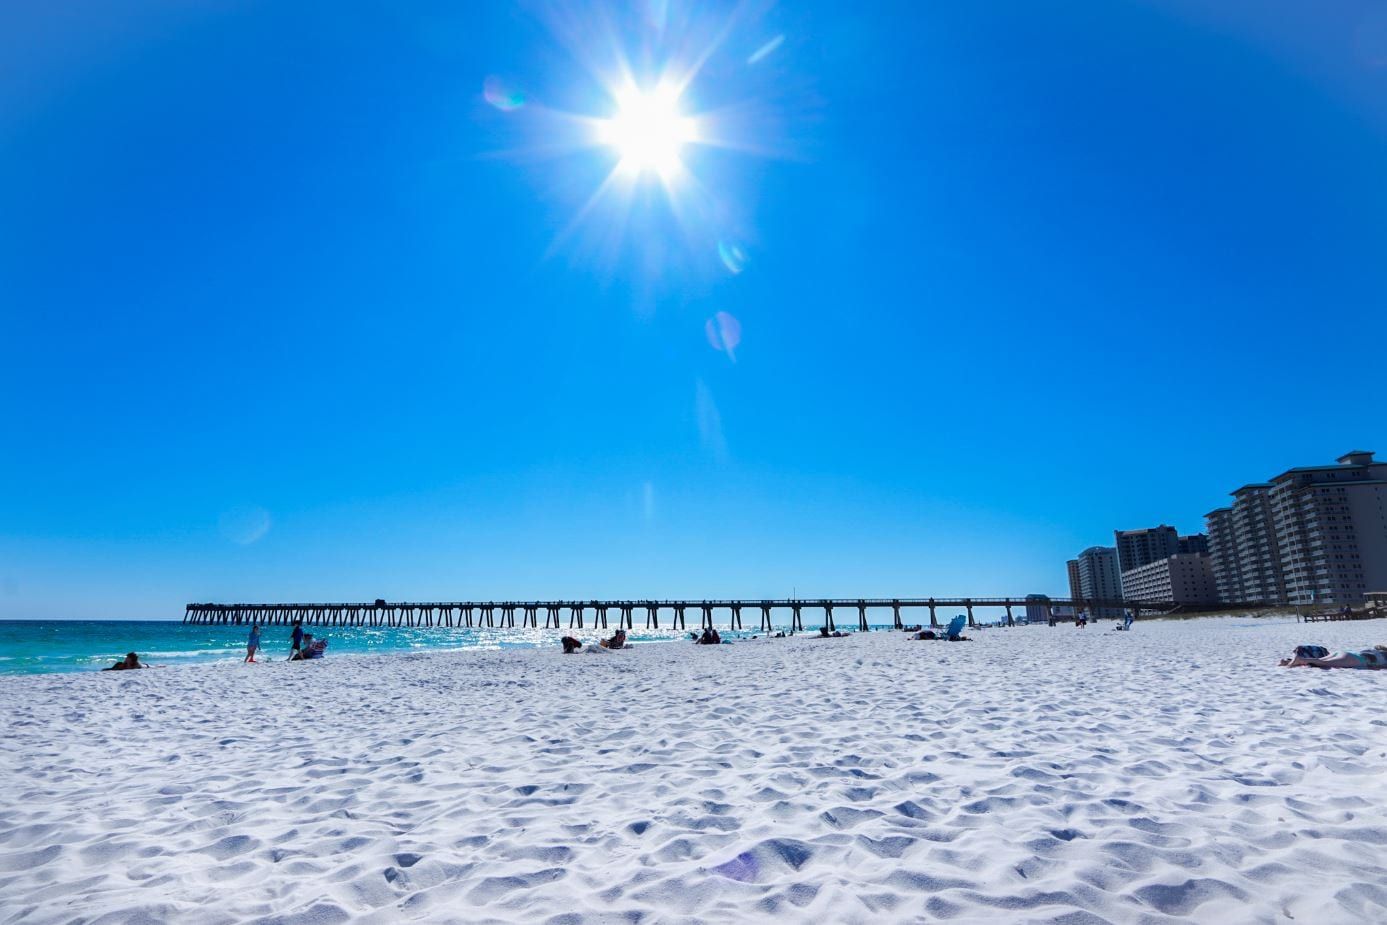 "Blue skies smiling at me. Nothing but blue skies do I see."
The sun is shining on the Gulf Coast. How else is excited to see these warmer temperatures lately?
Today's Photo of the Day was submitted by Kayla Guzman.